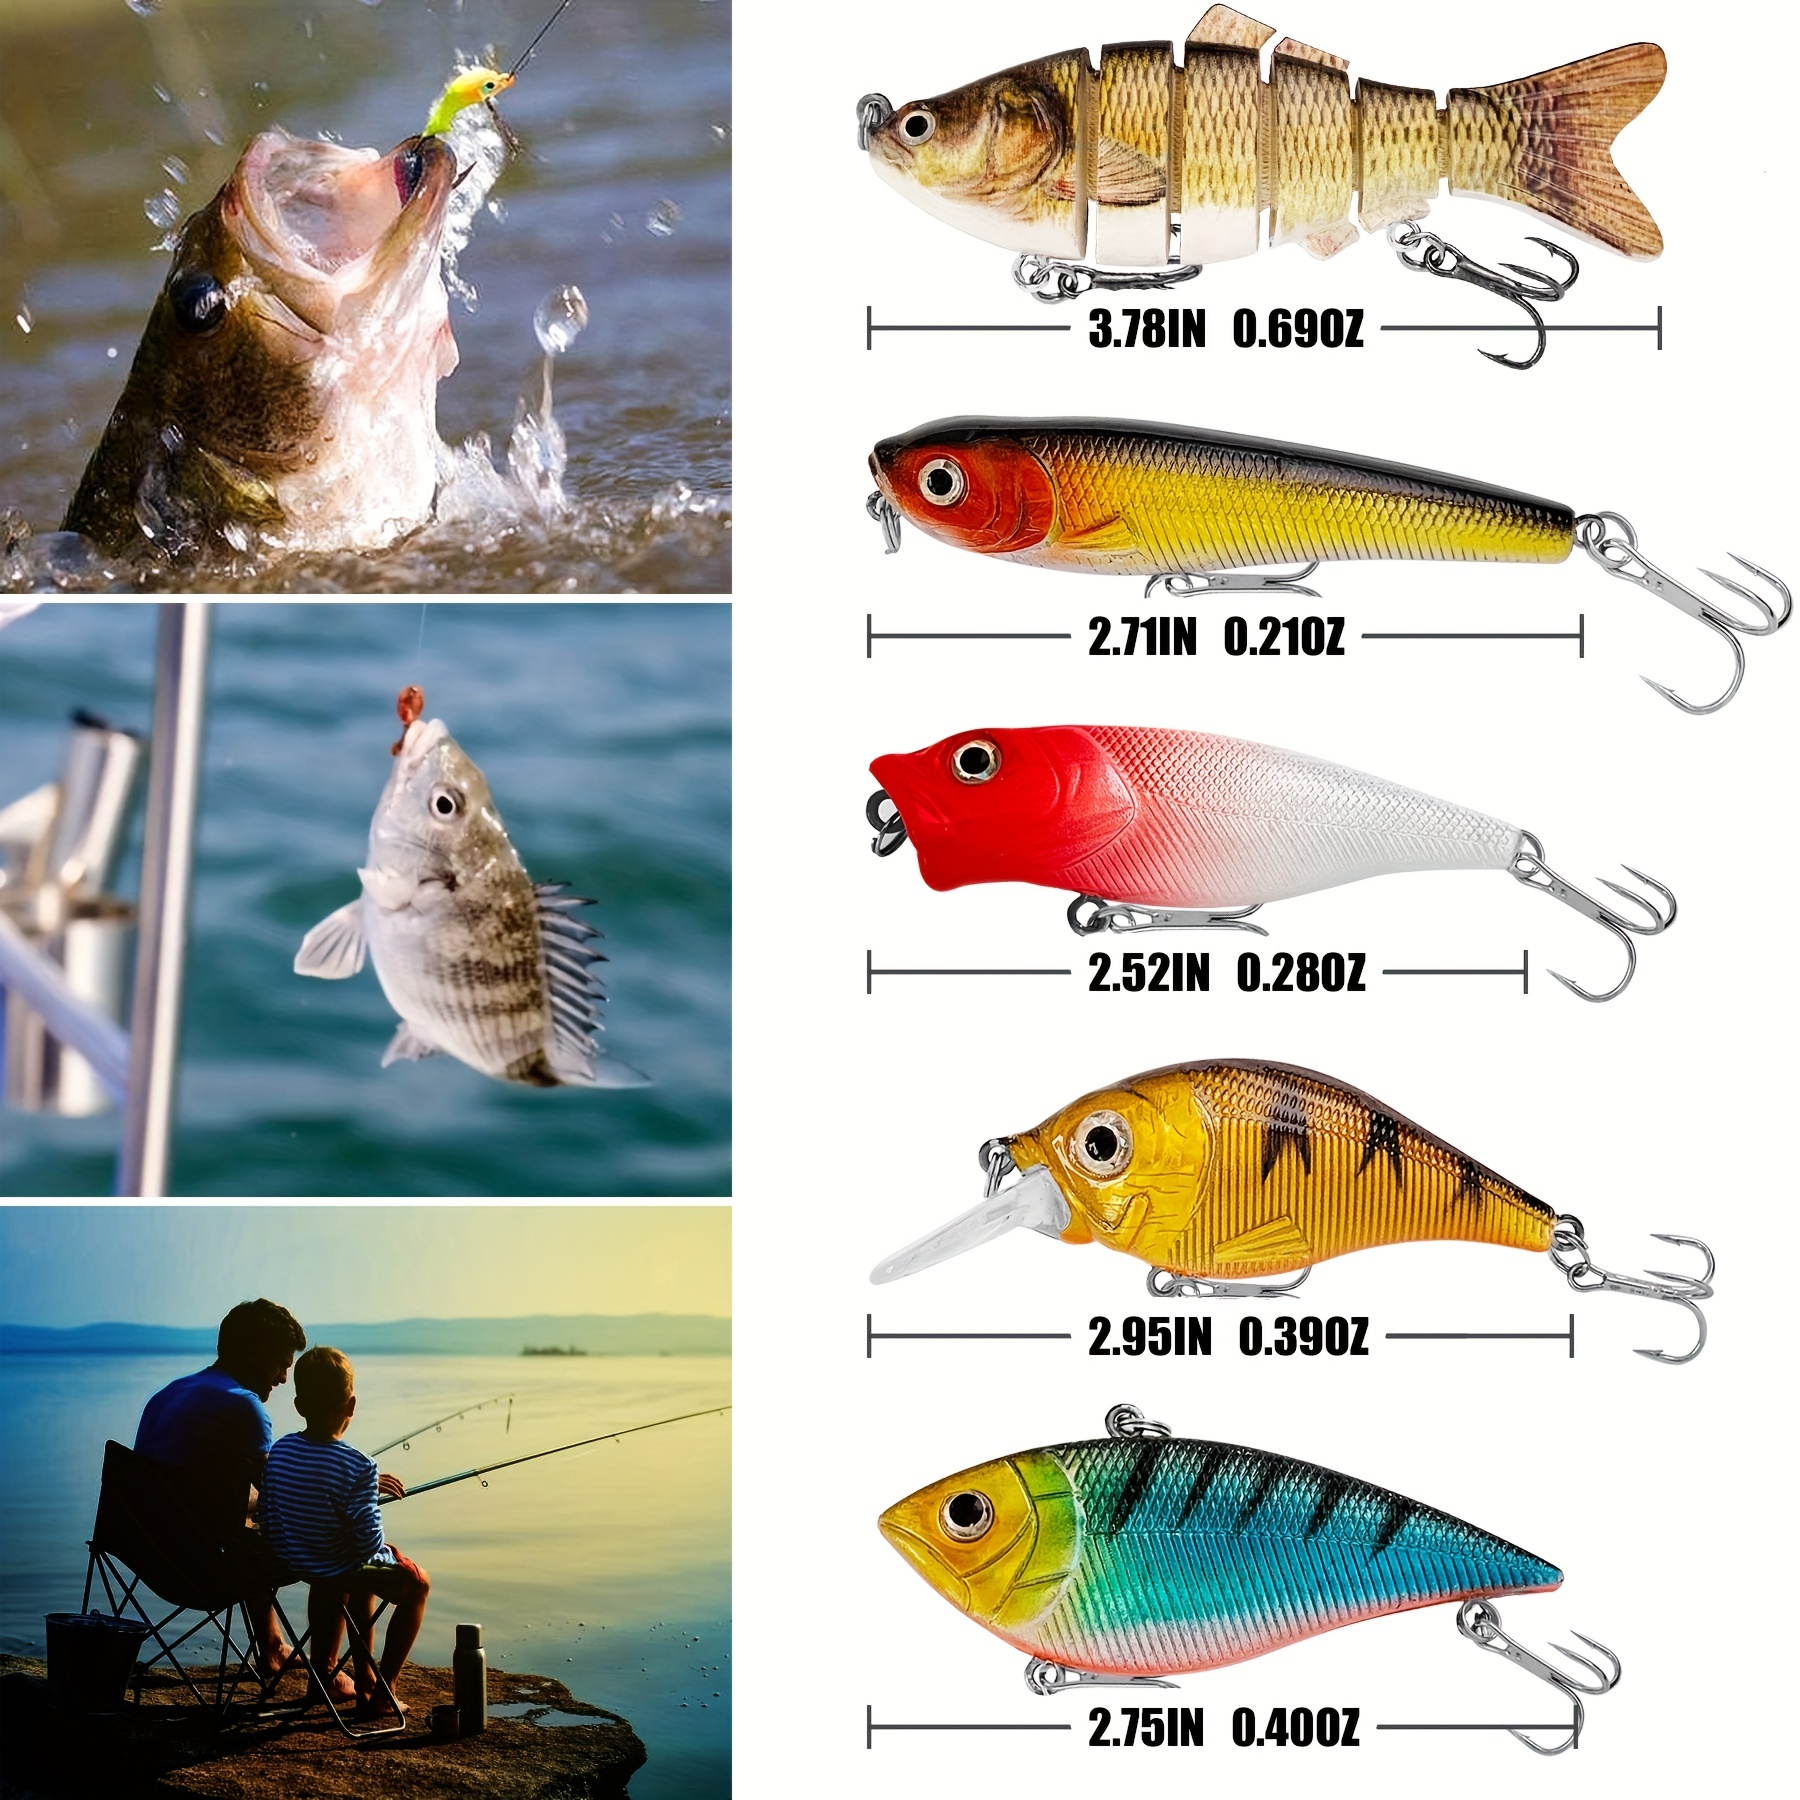  Bass Fishing Spinner Bait Lures, Multicolor Buzzbait Metal Jig  Fishing Lure Kit Swimbaits for Bass Pike Trout Freshwater Saltwater Fishing  (10pcs) : Sports & Outdoors